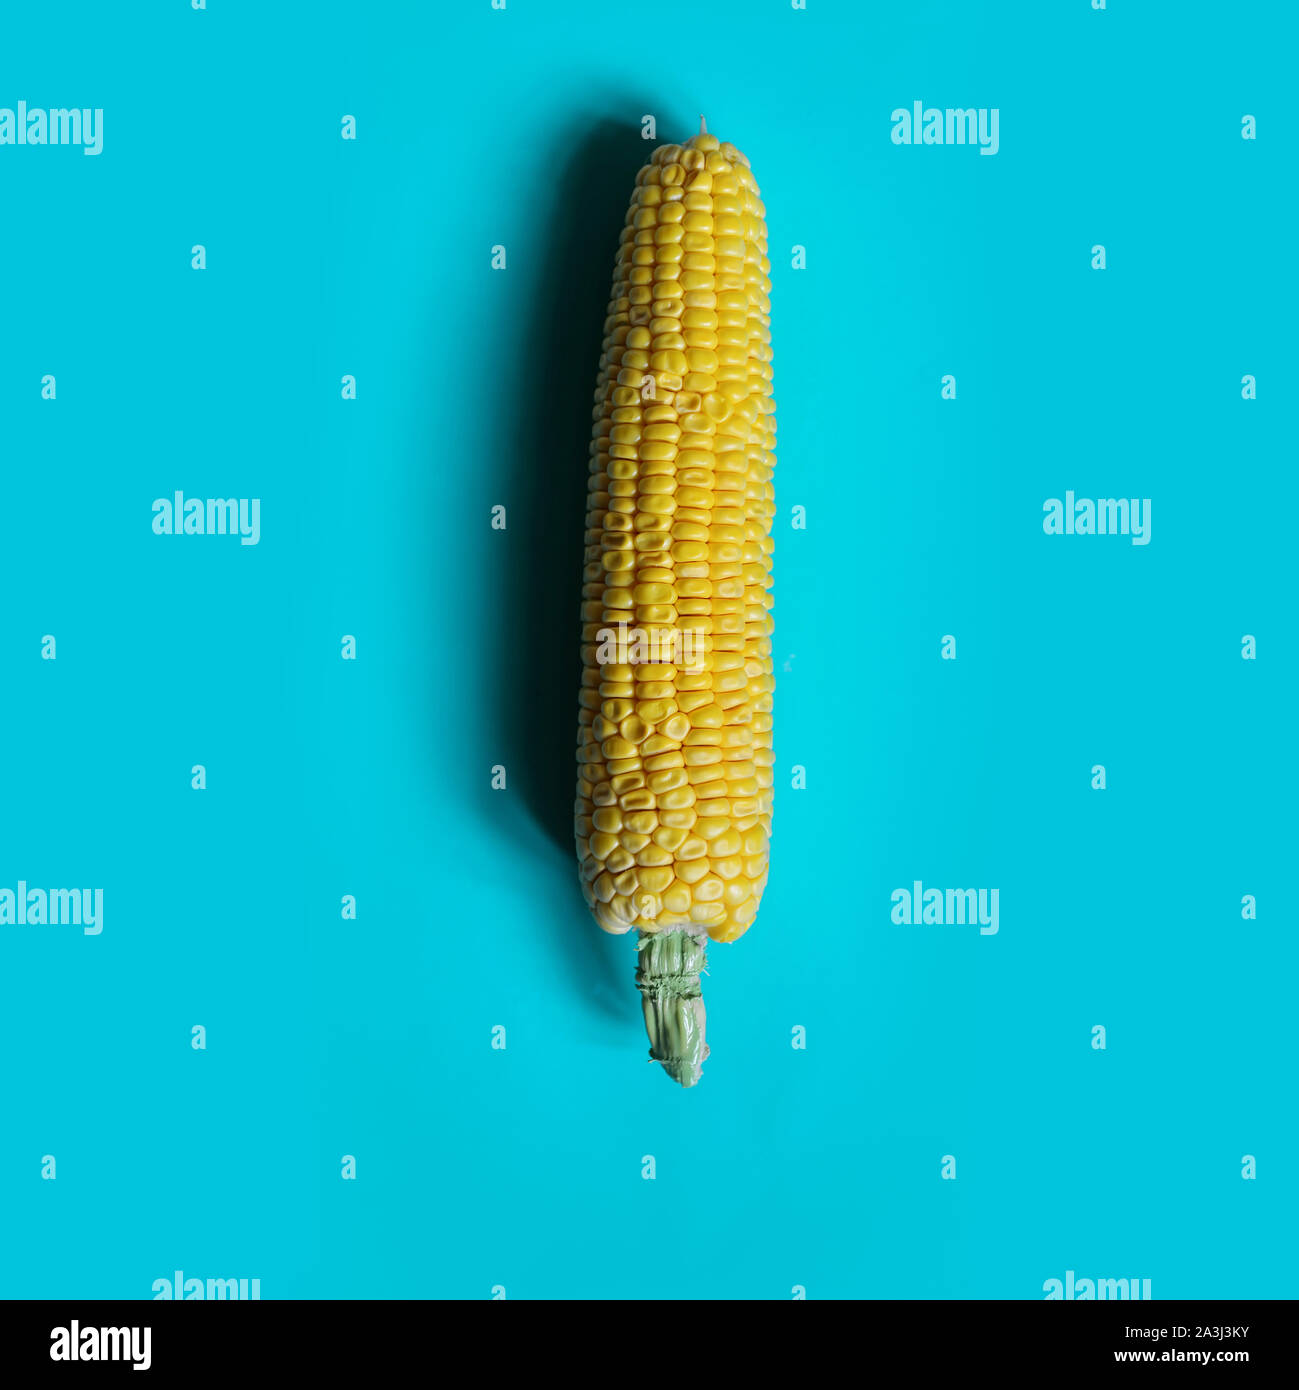 Creative yellow corn on blue background.Minimal food concept.Top view. Flat lay. Macro concept Stock Photo